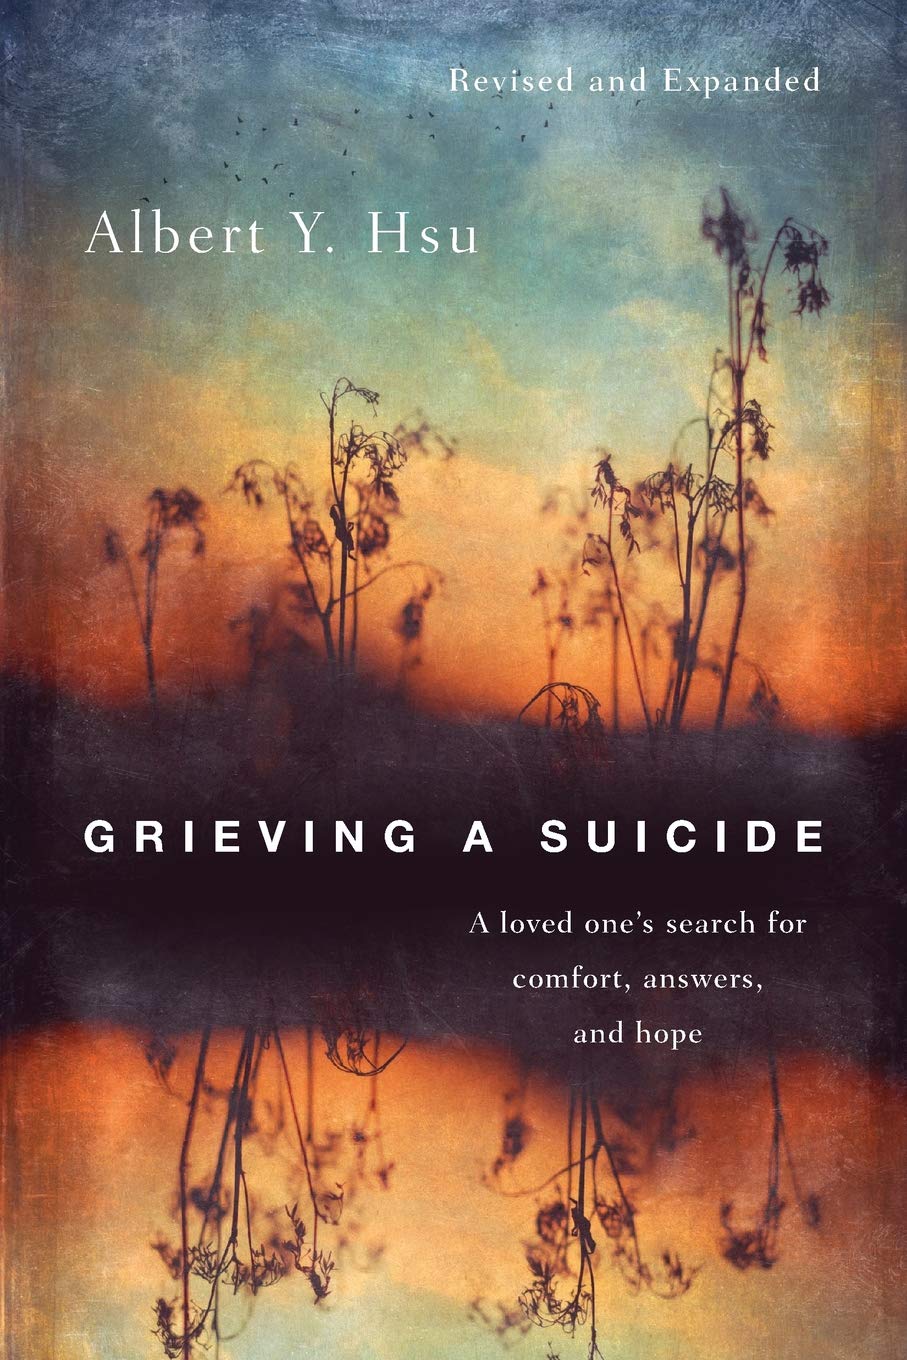 Grieving a Suicide: A Loved One's Search for Comfort, Answers Hope